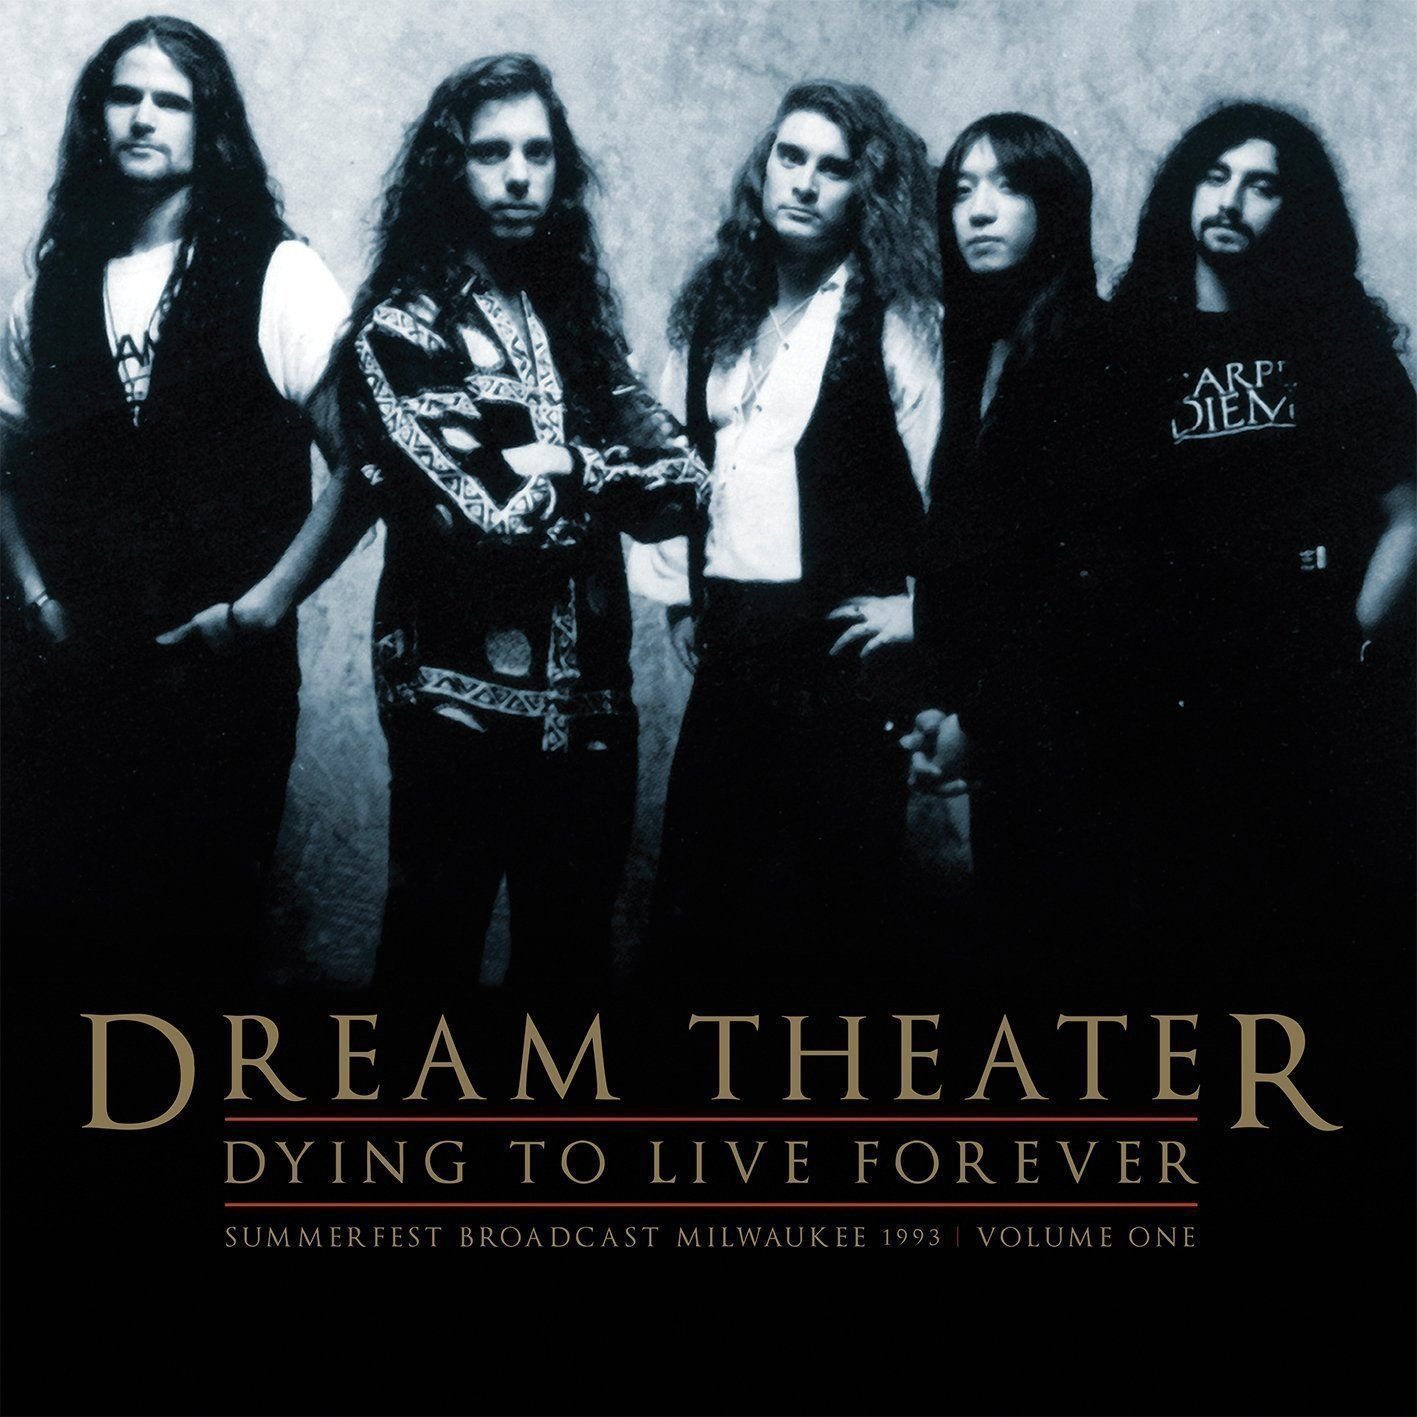 LP platňa Dream Theater - Dying To Live Forever - Milwaukee 1993 Vol. 1 (2 LP)